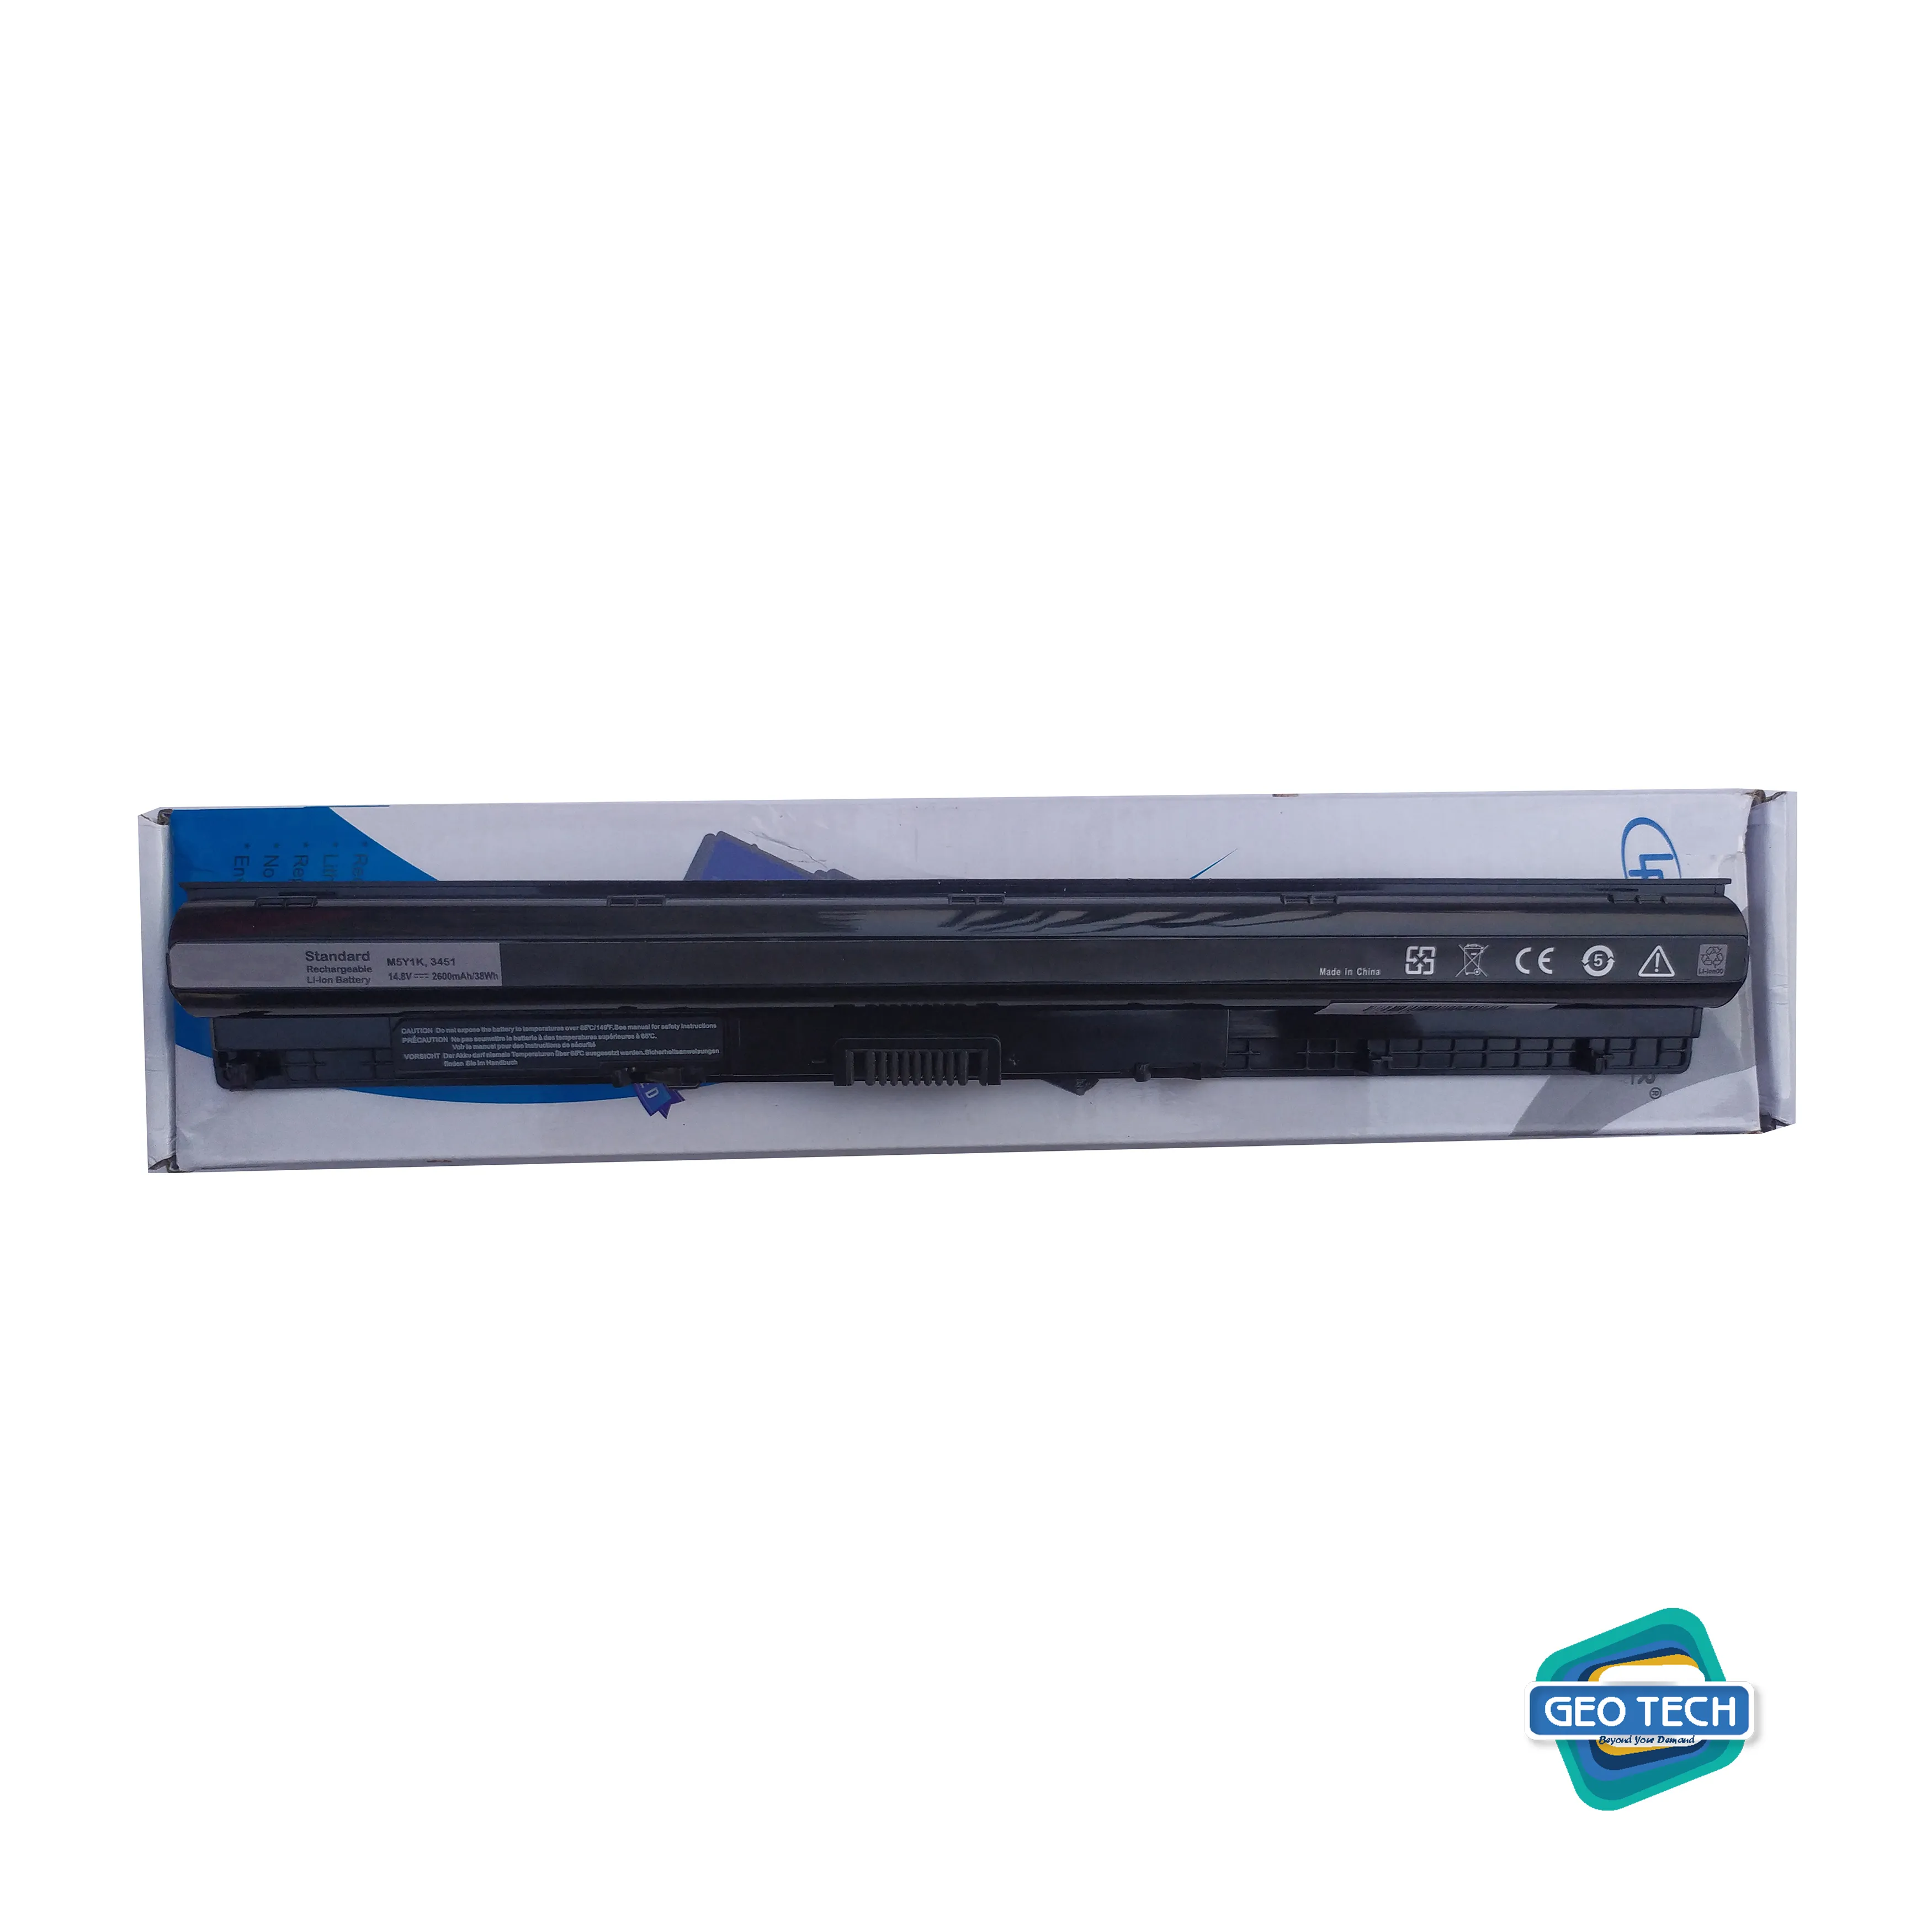 New M5Y1k Laptop Battery 14.8V 38WH For DELL Inspiron 3451 3551 5558 5758 M5Y1K Vostro